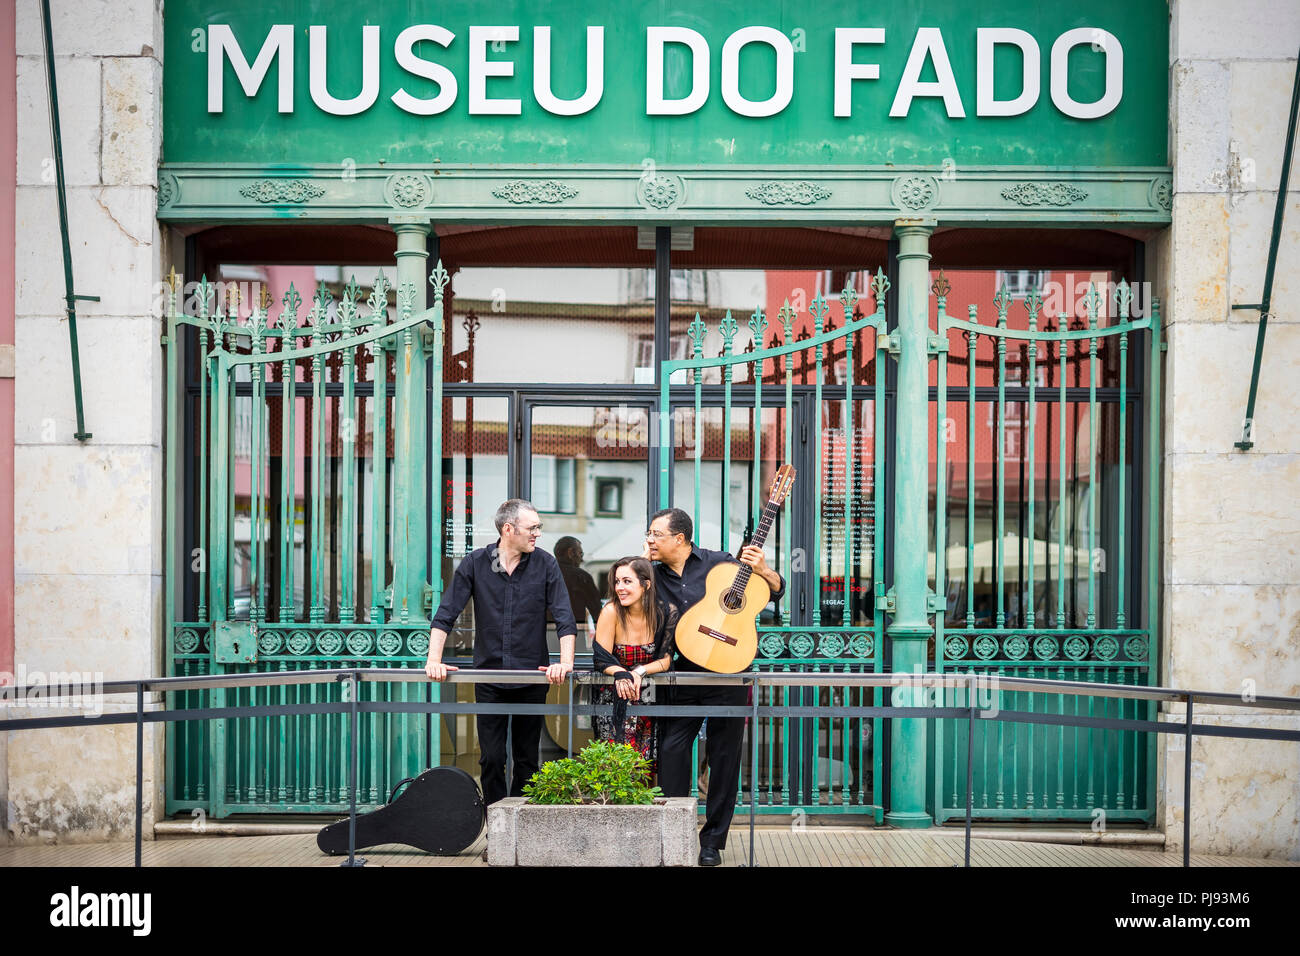 Portuguese guitar player, fado singer and acoustic guitar player in front of Fado Museum in Lisbon, Portugal Stock Photo